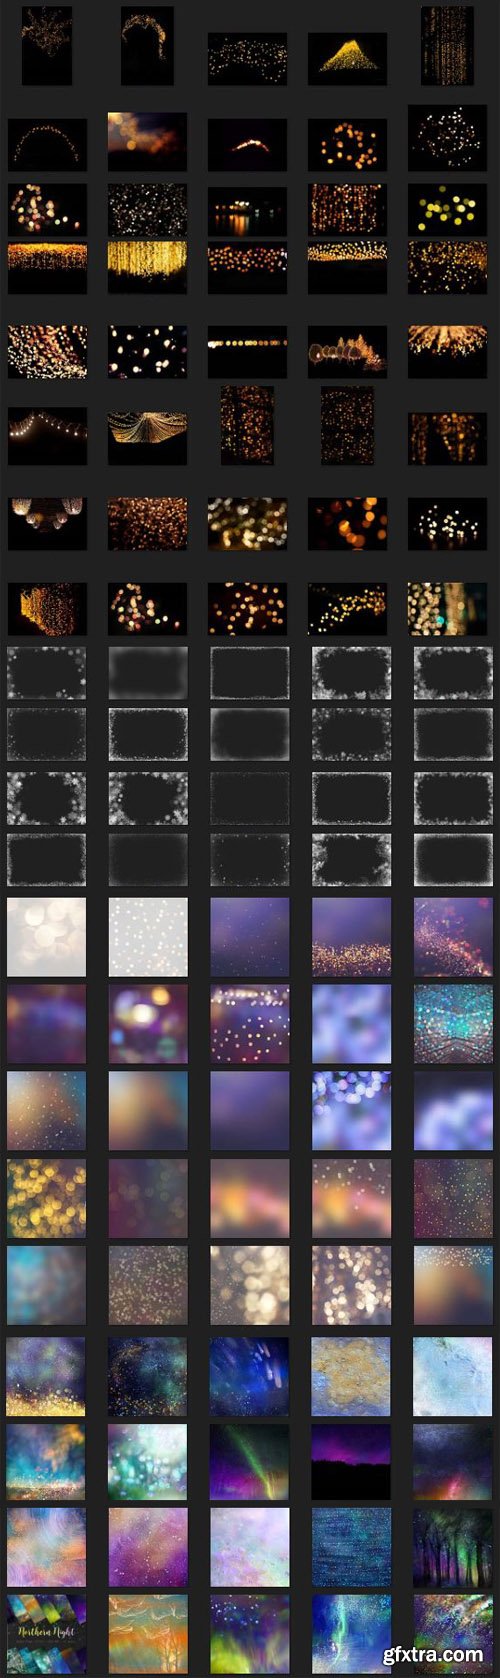 150+ Holiday Overlays Collection for Photoshop